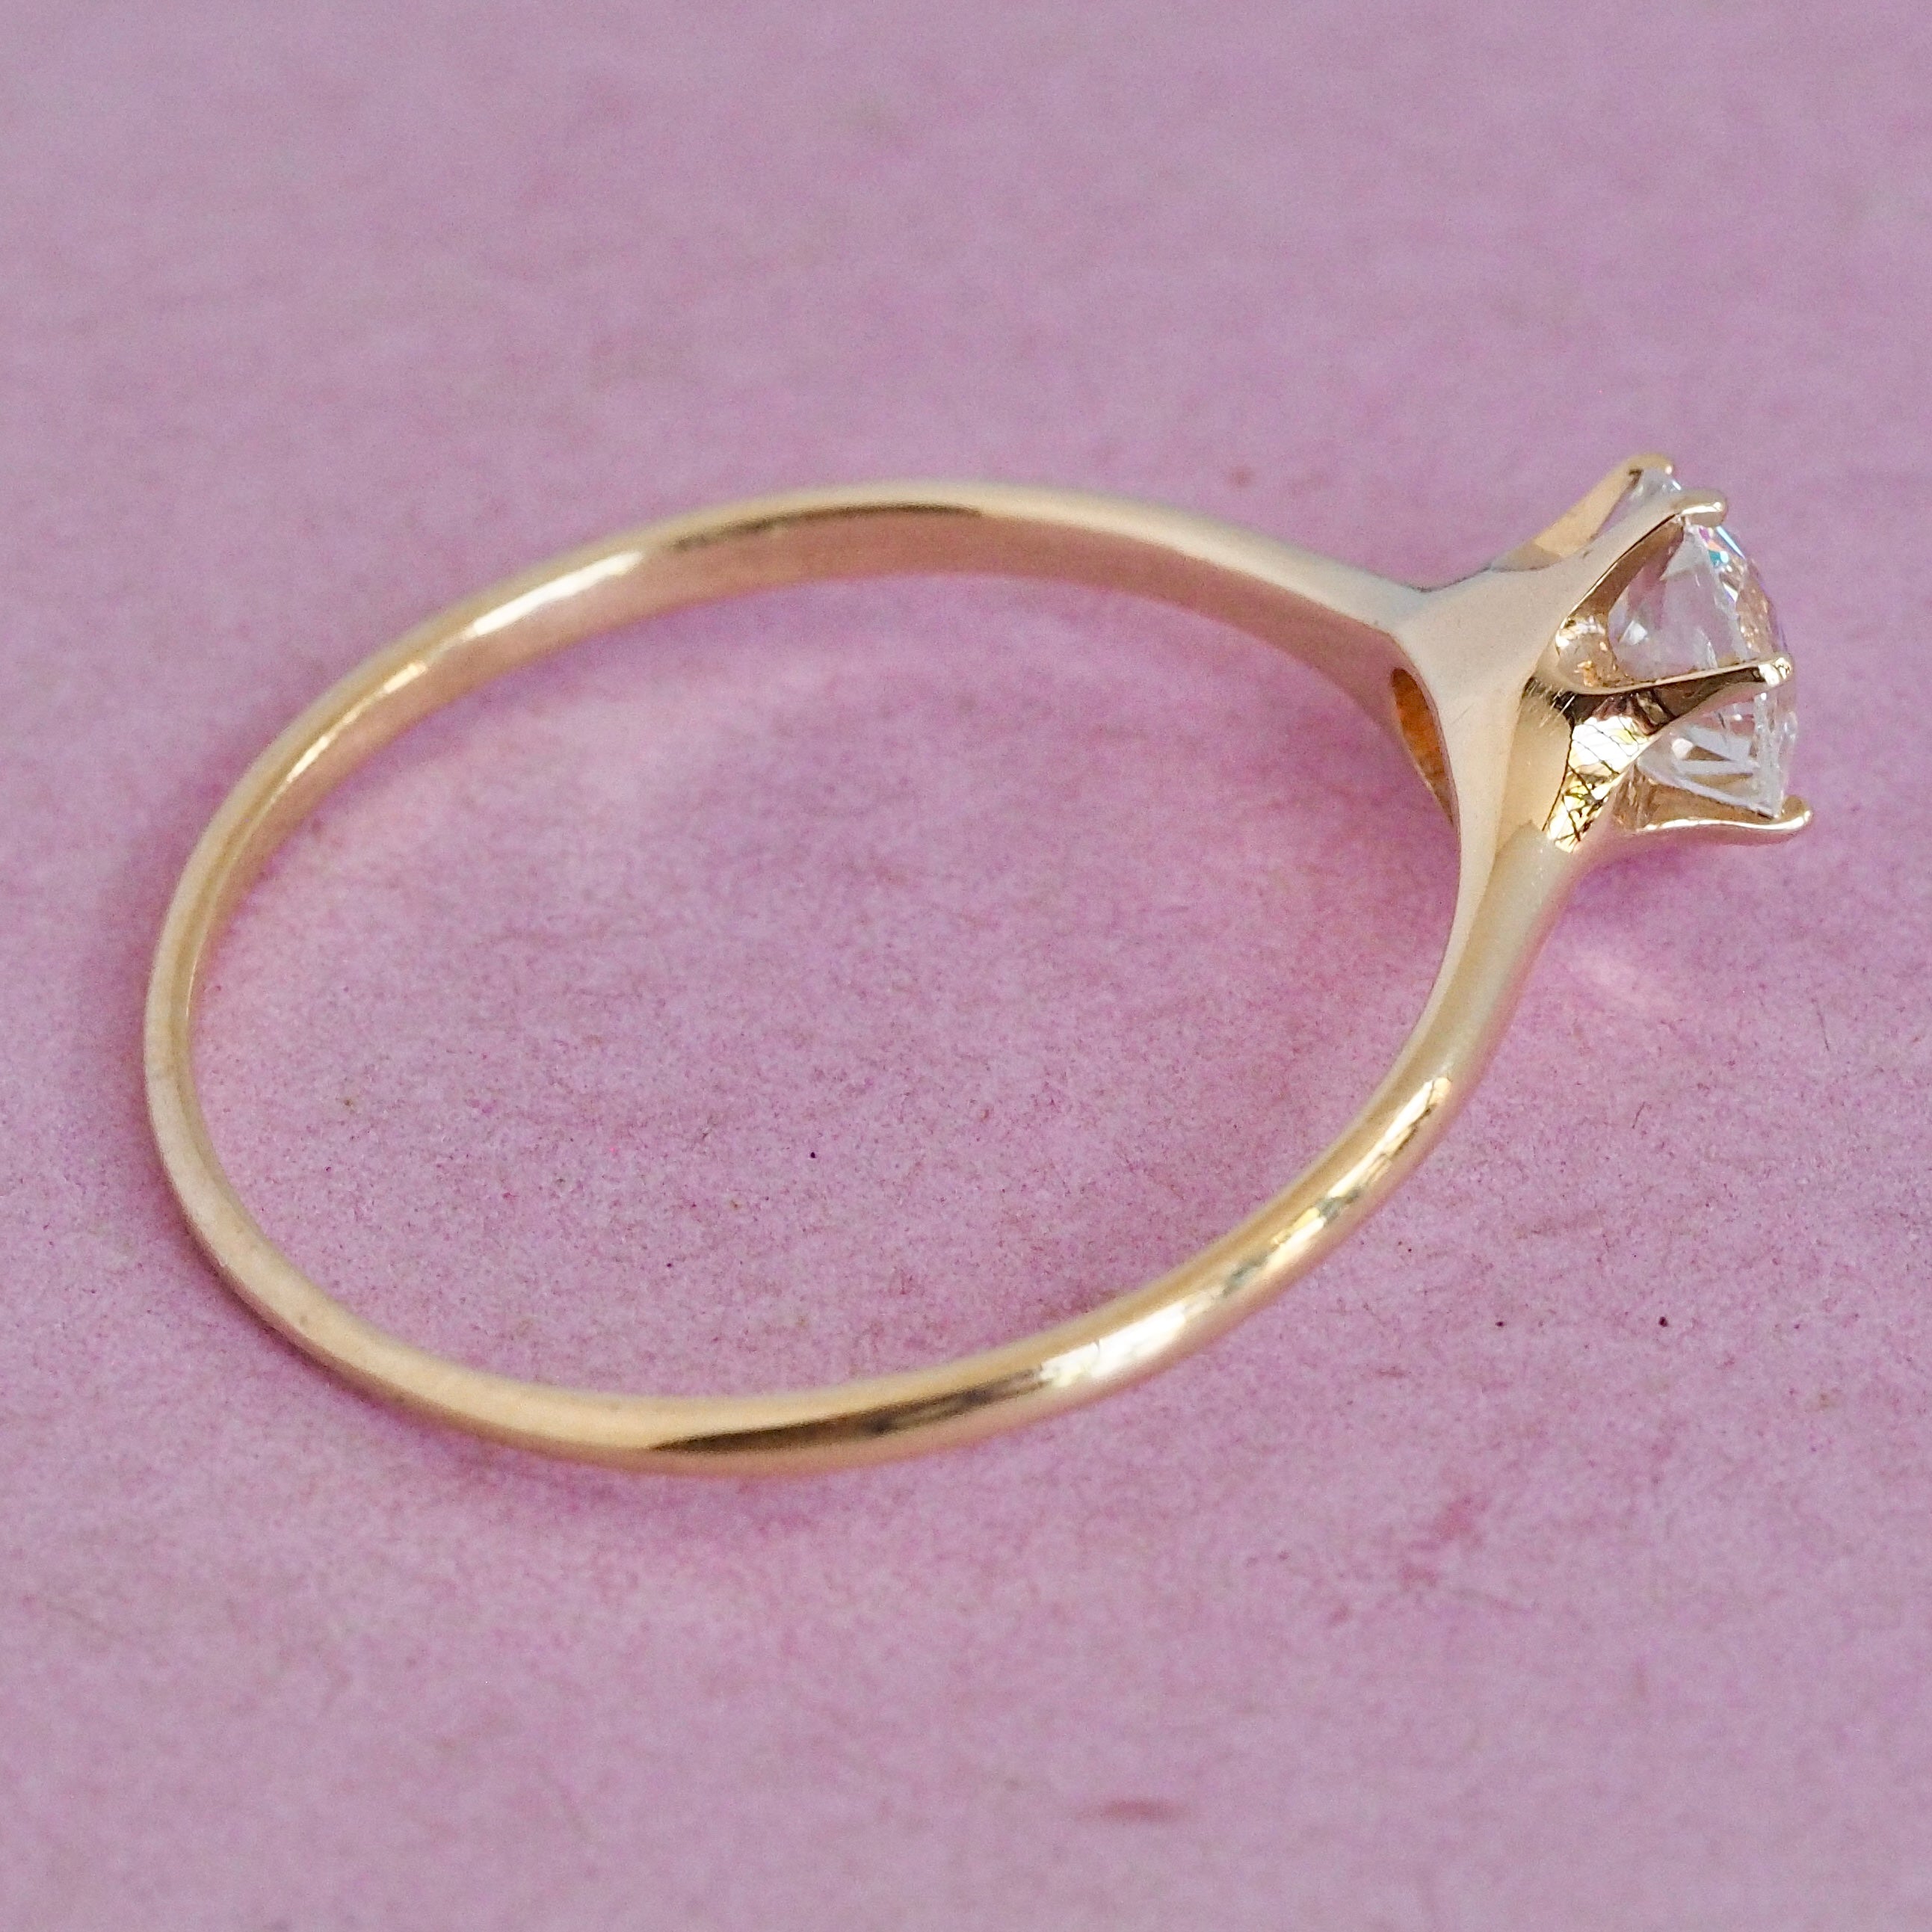 Antique 18k Gold Peacock Old European Cut Diamond Solitaire Ring